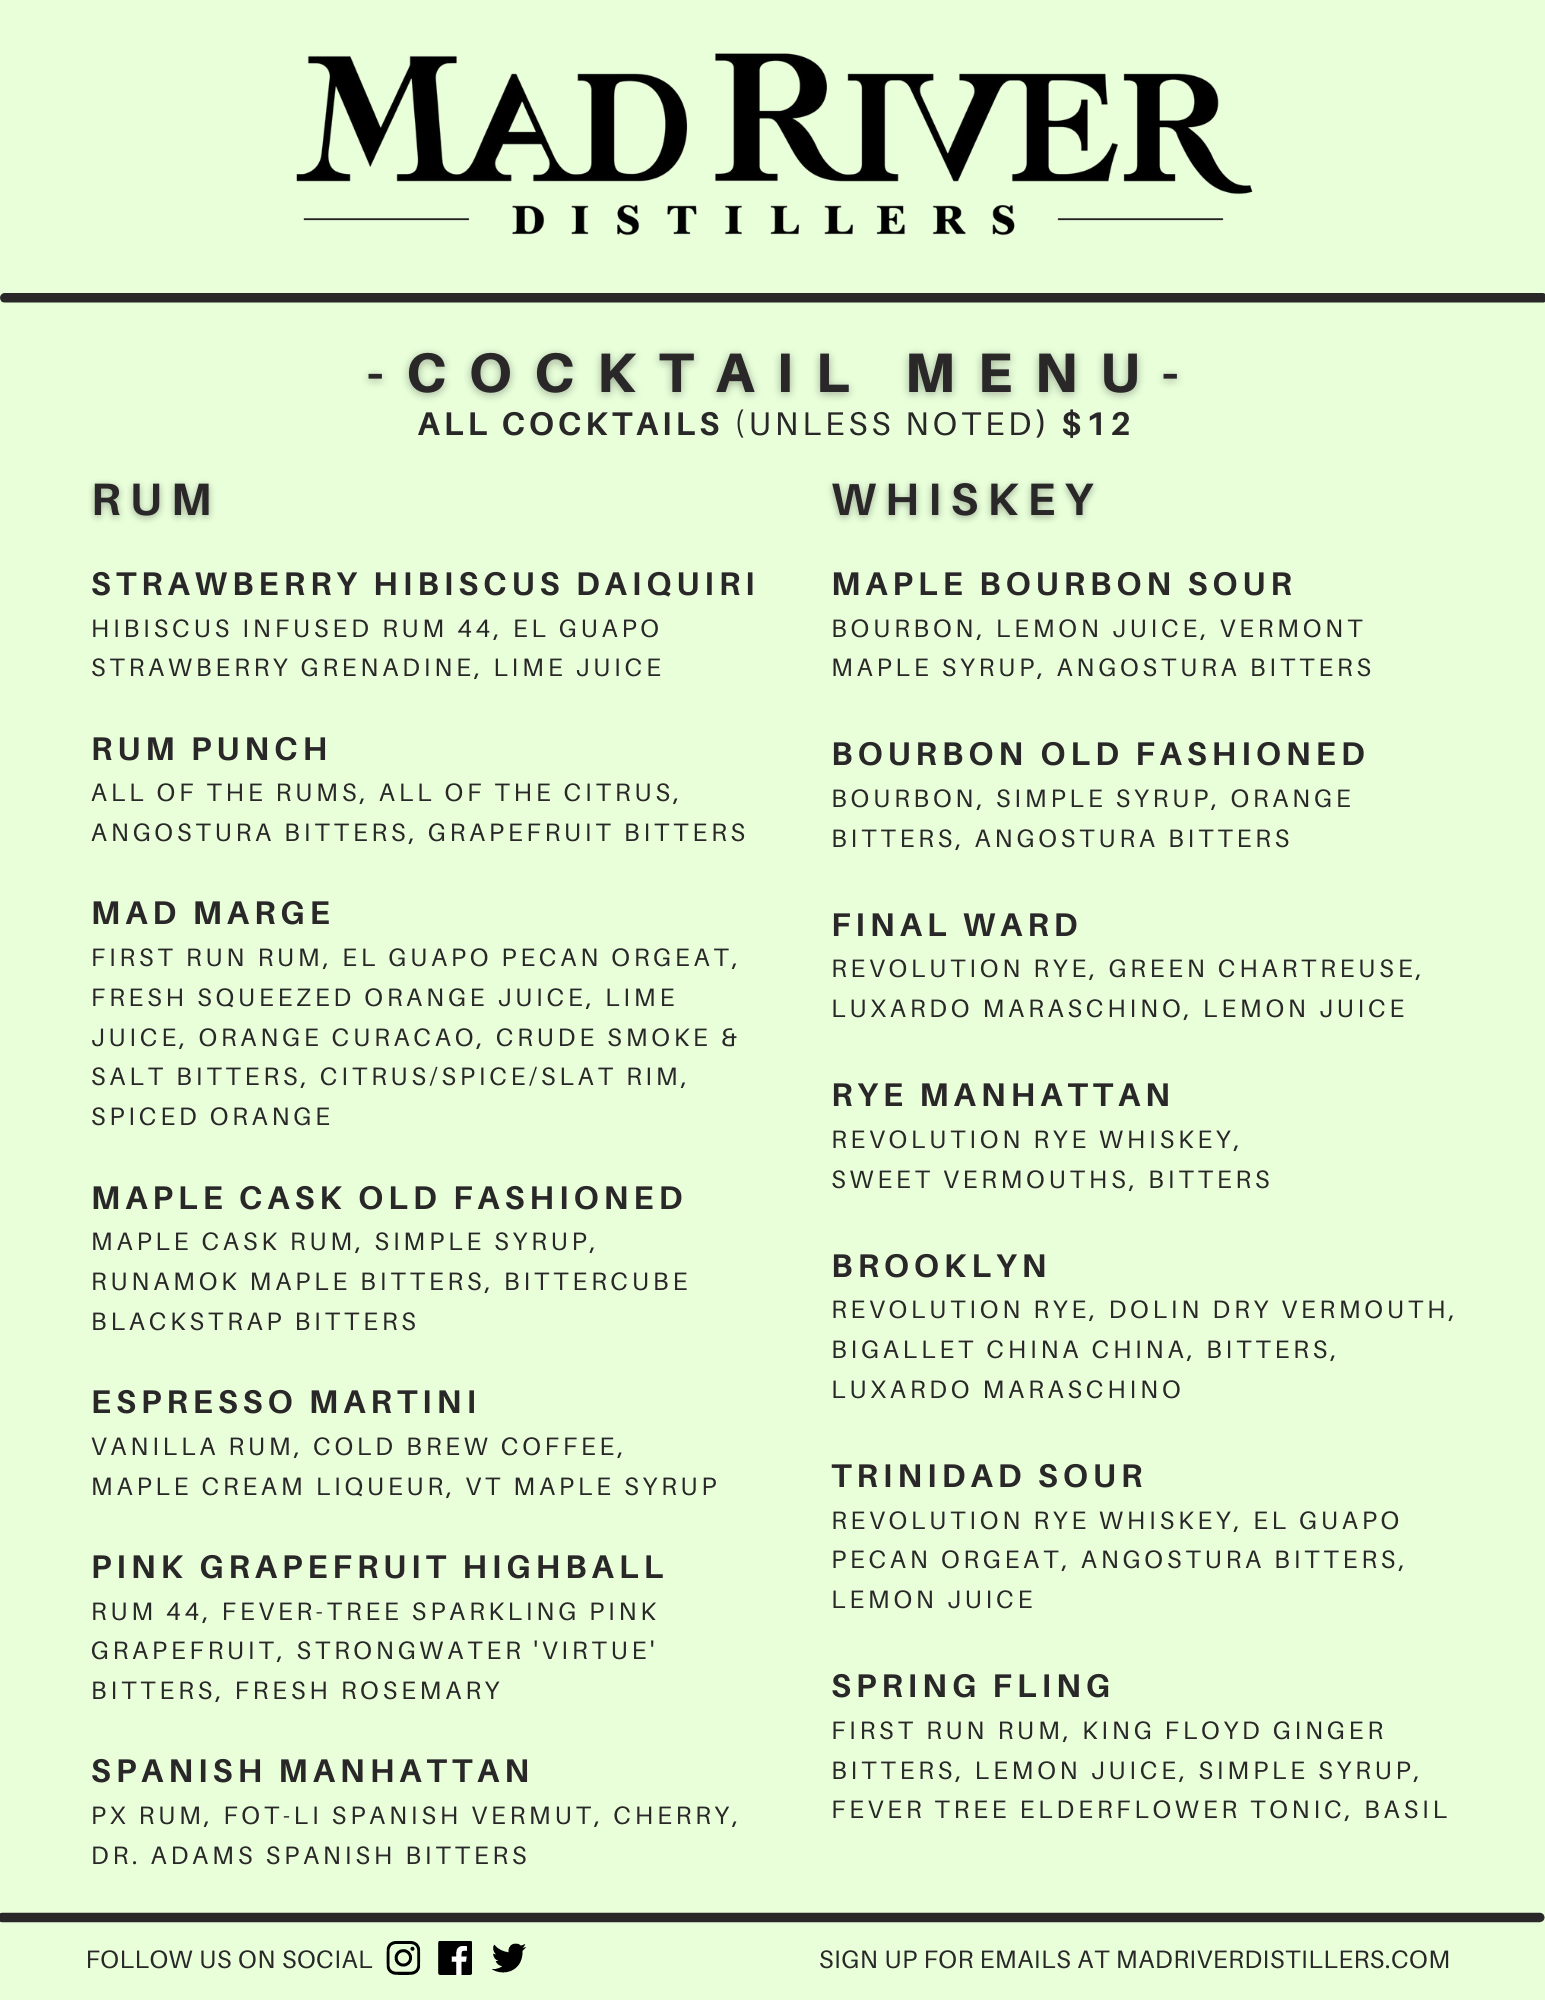 Current cocktail menu includes: Strawberry Hibiscus Daiquiri, Rum Punch, Mad Marge, Maple Cask Old Fashioned, Espresso Martini, Pink Grapefruit Highball, Spanish Manhattan, Maple Bourbon Sour, Bourbon Old Fashioned, Final Ward, Rye Manhattan, Brooklyn, Trinidad Sour, Spring Fling